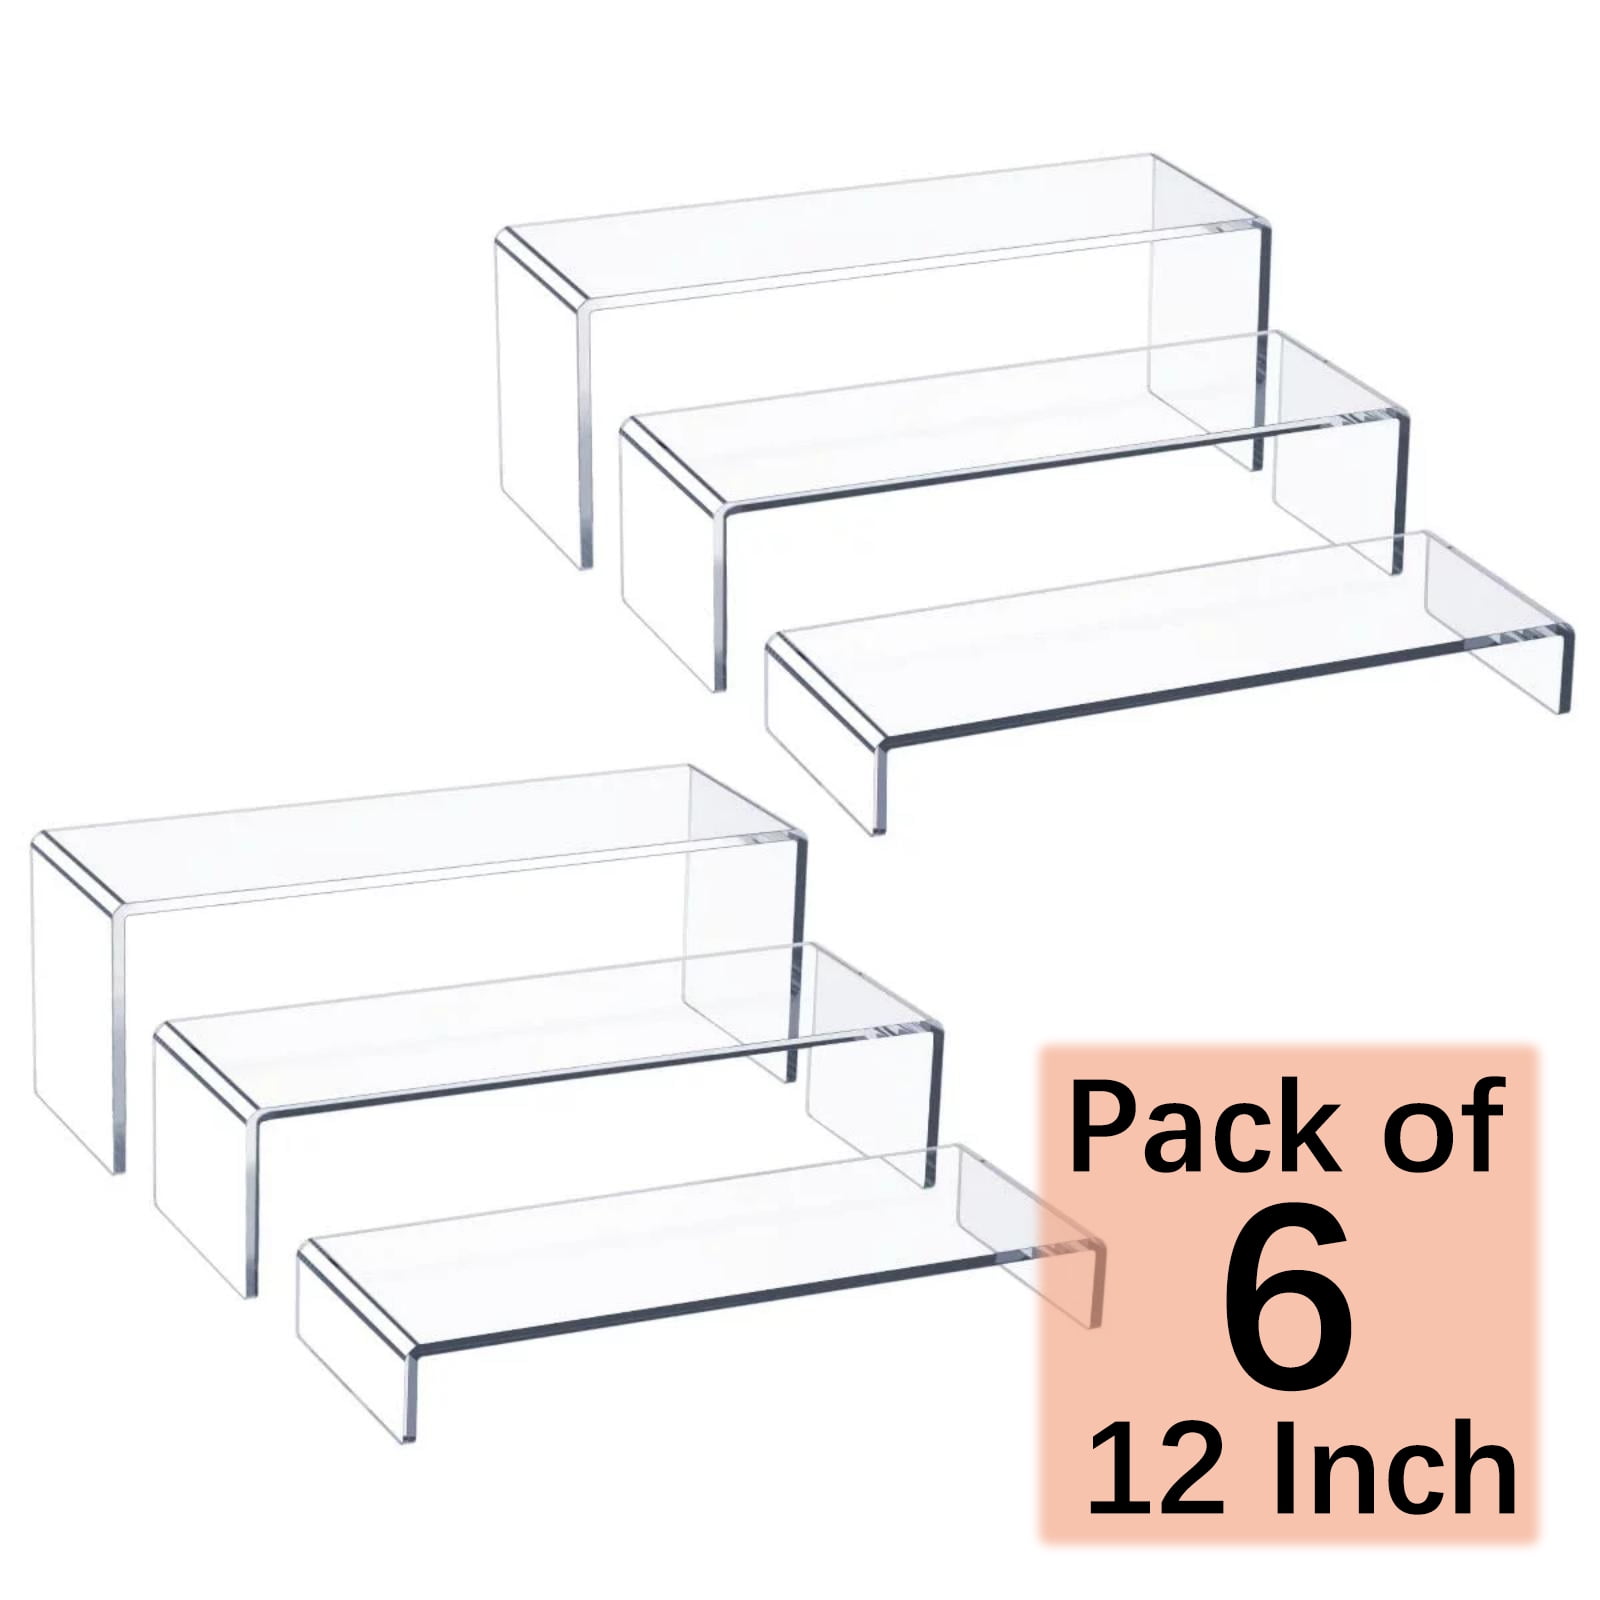 VANGAY Spice Rack Drawer, 4 Tier Expands From 13 to 26 Drawer Spice  Organizer for Jars and Packets, Adjustable Storage Salt,  Seasoning，(Metallic